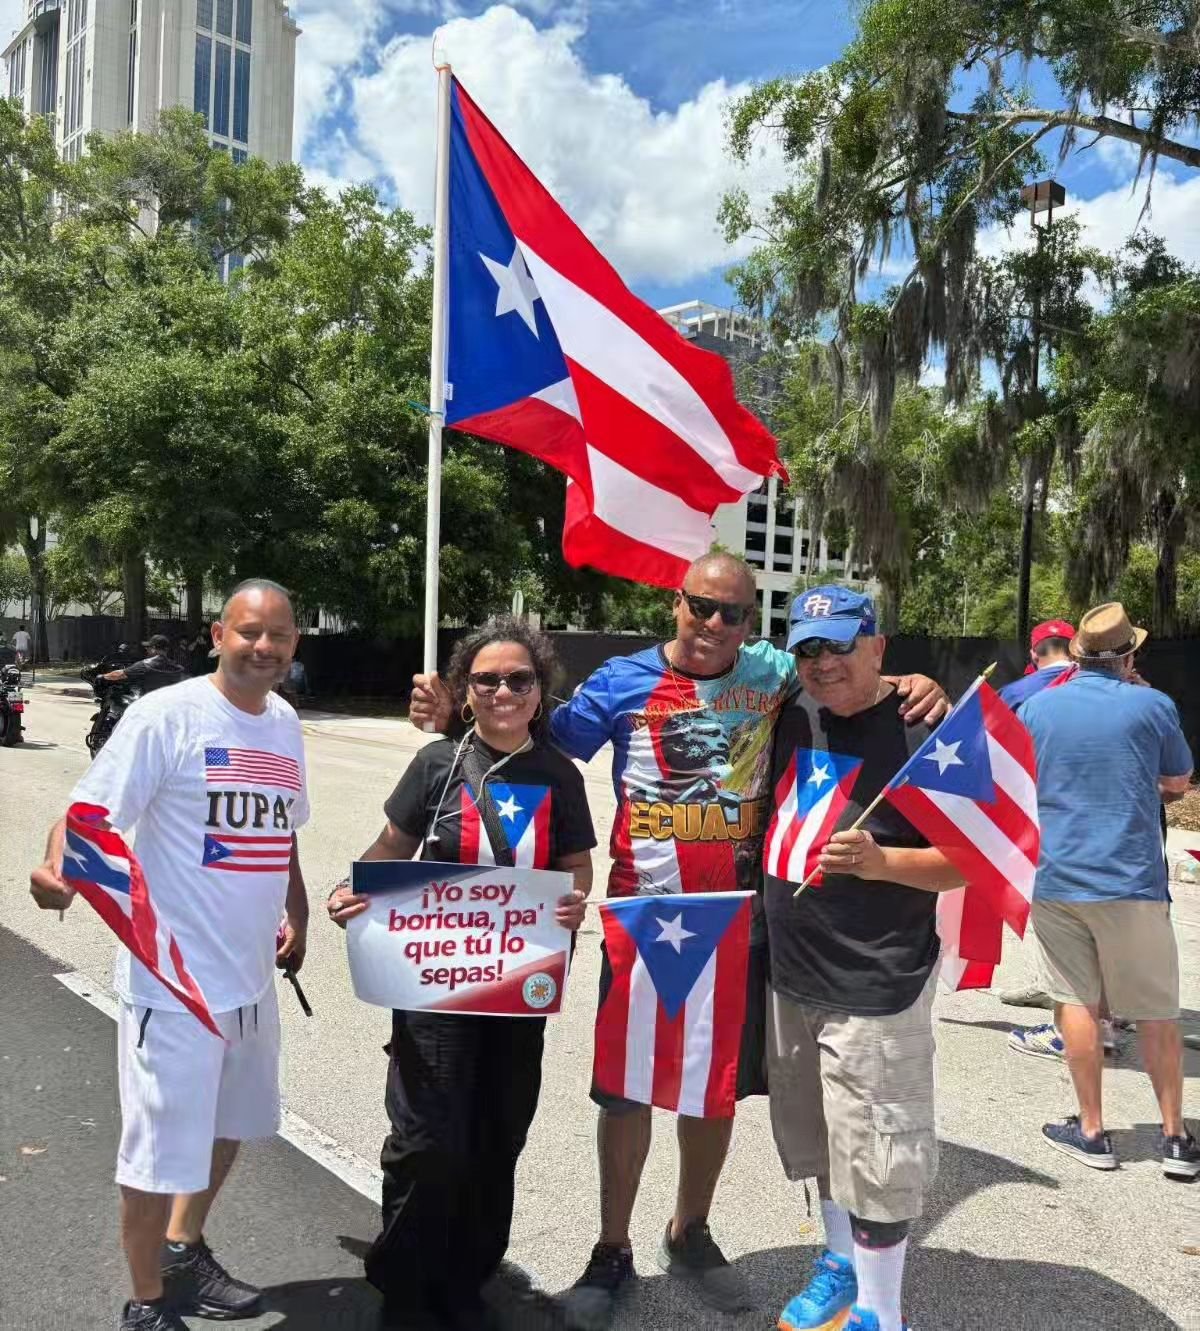 @cflclaa Central Florida Chapter joined the Puerto Rican Parade in Downton #orlando. We are proud to celebrate culture and diversity! #puertorican #parade #florida #culture #latinos #latinoculture #union #unionstrong